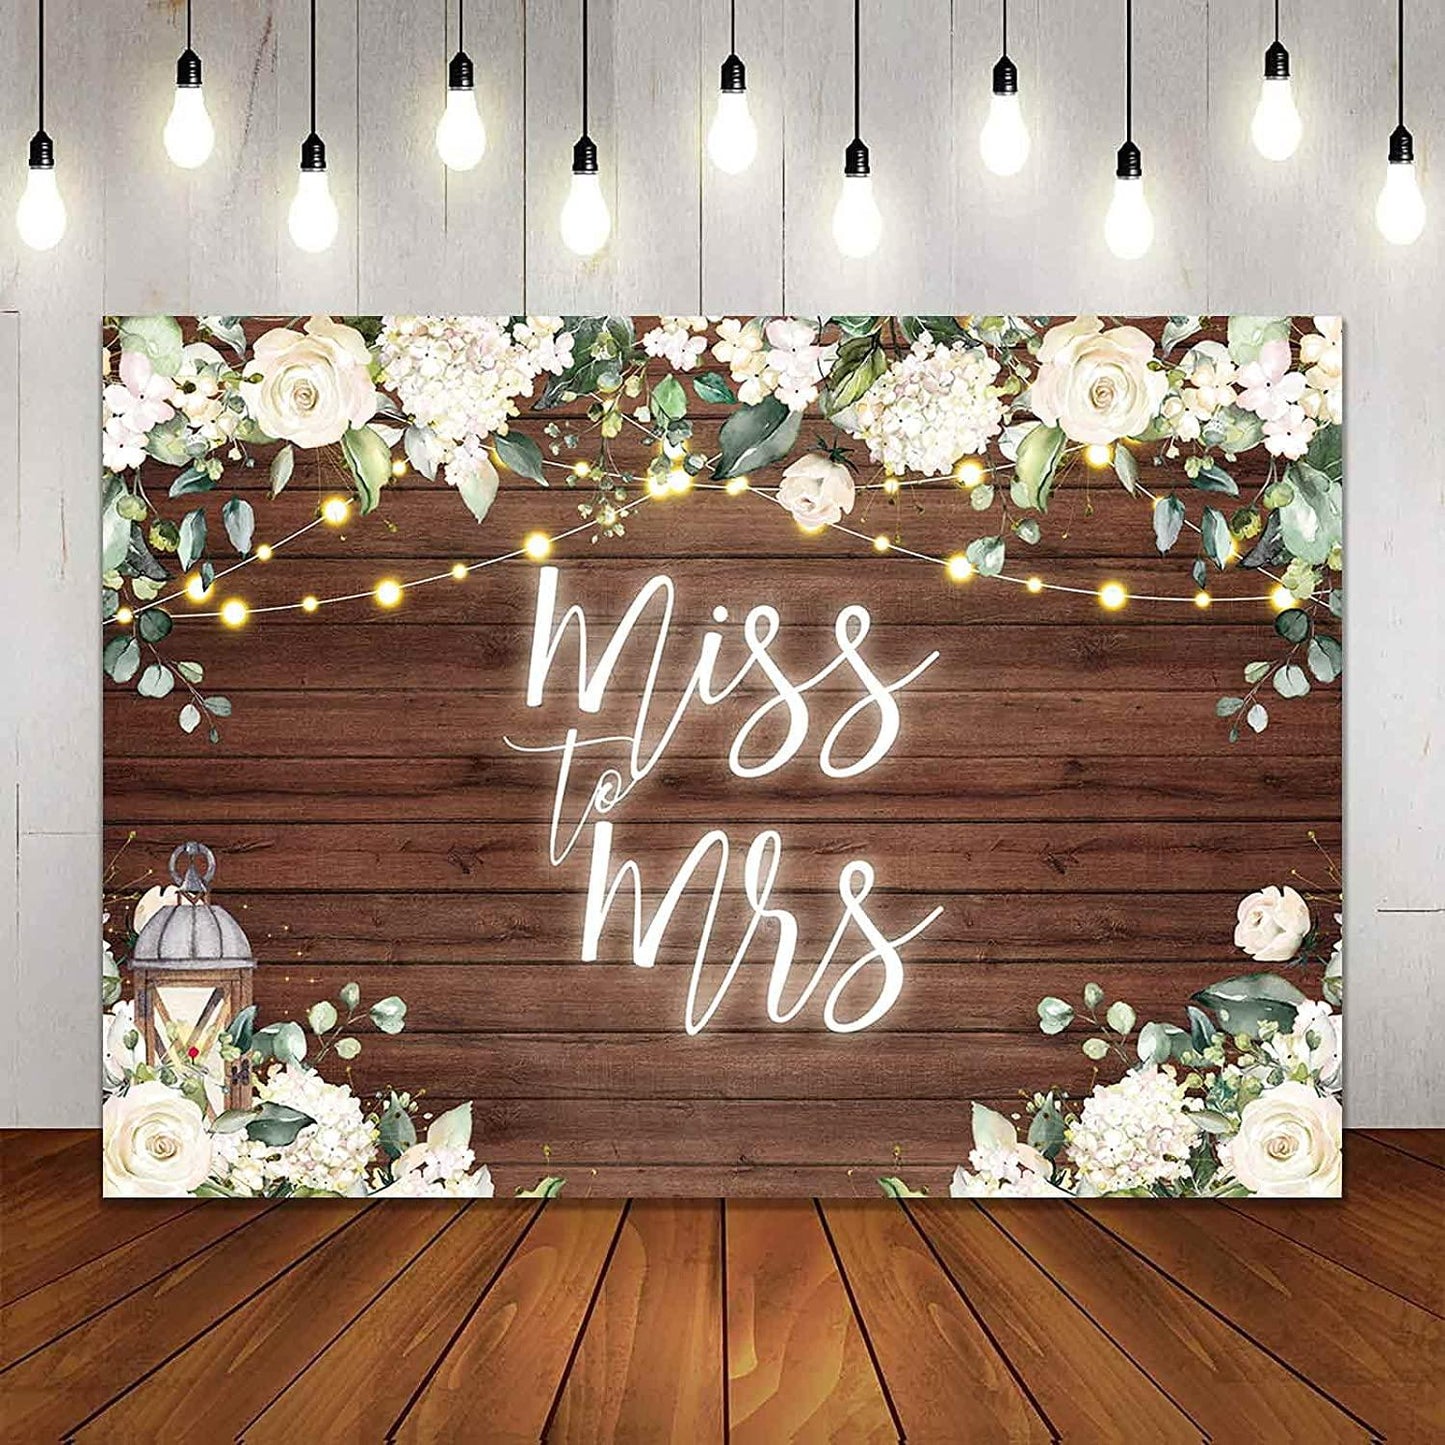 Miss to Mrs Backdrop for Bridal Shower Rustic White Floral Brown Wood Flower Wooden Wall Decoration - If you say i do